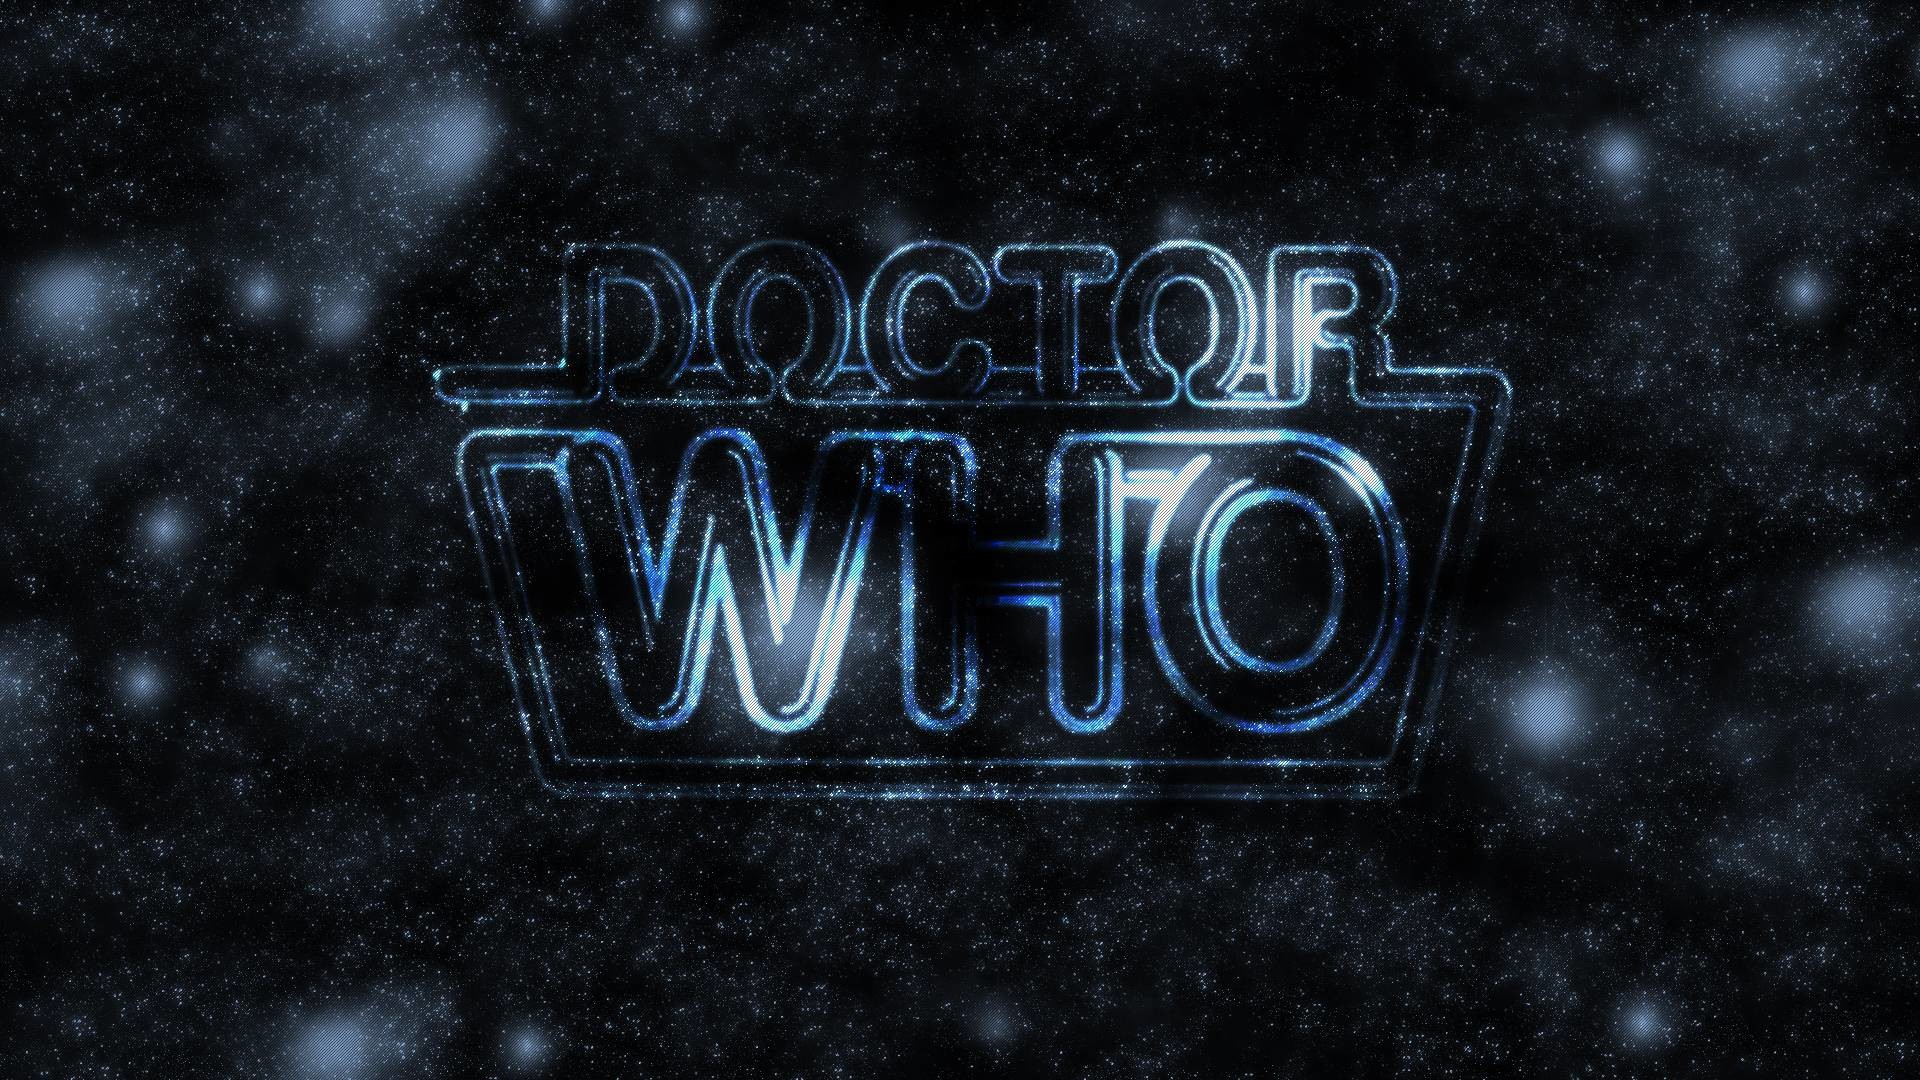 1920x1080 The Doctor in the Stars HD Wallpaper | Download HD Wallpaper, High .